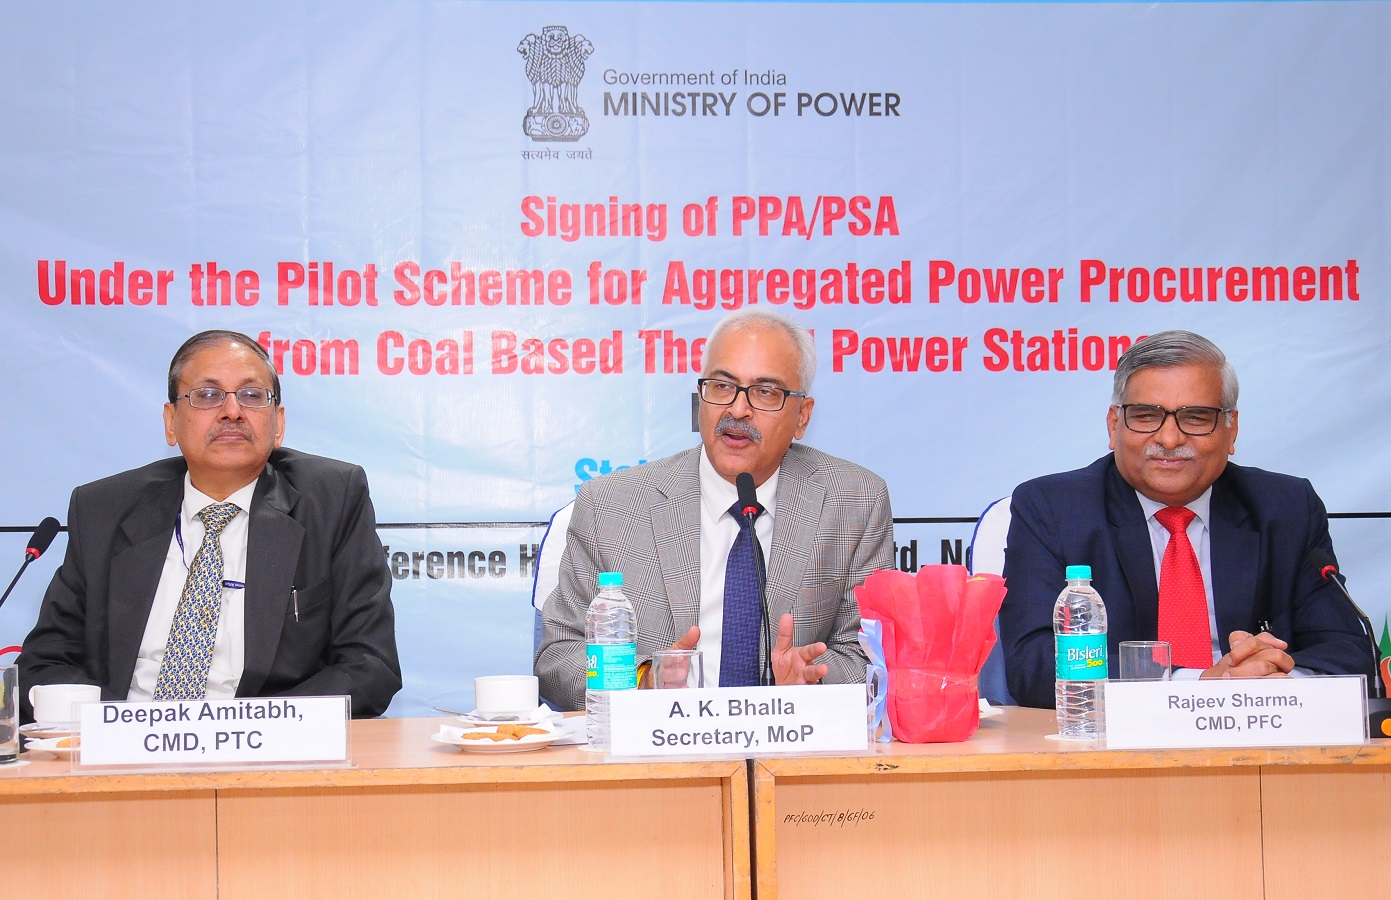 State Discoms signed PPAs with PTC